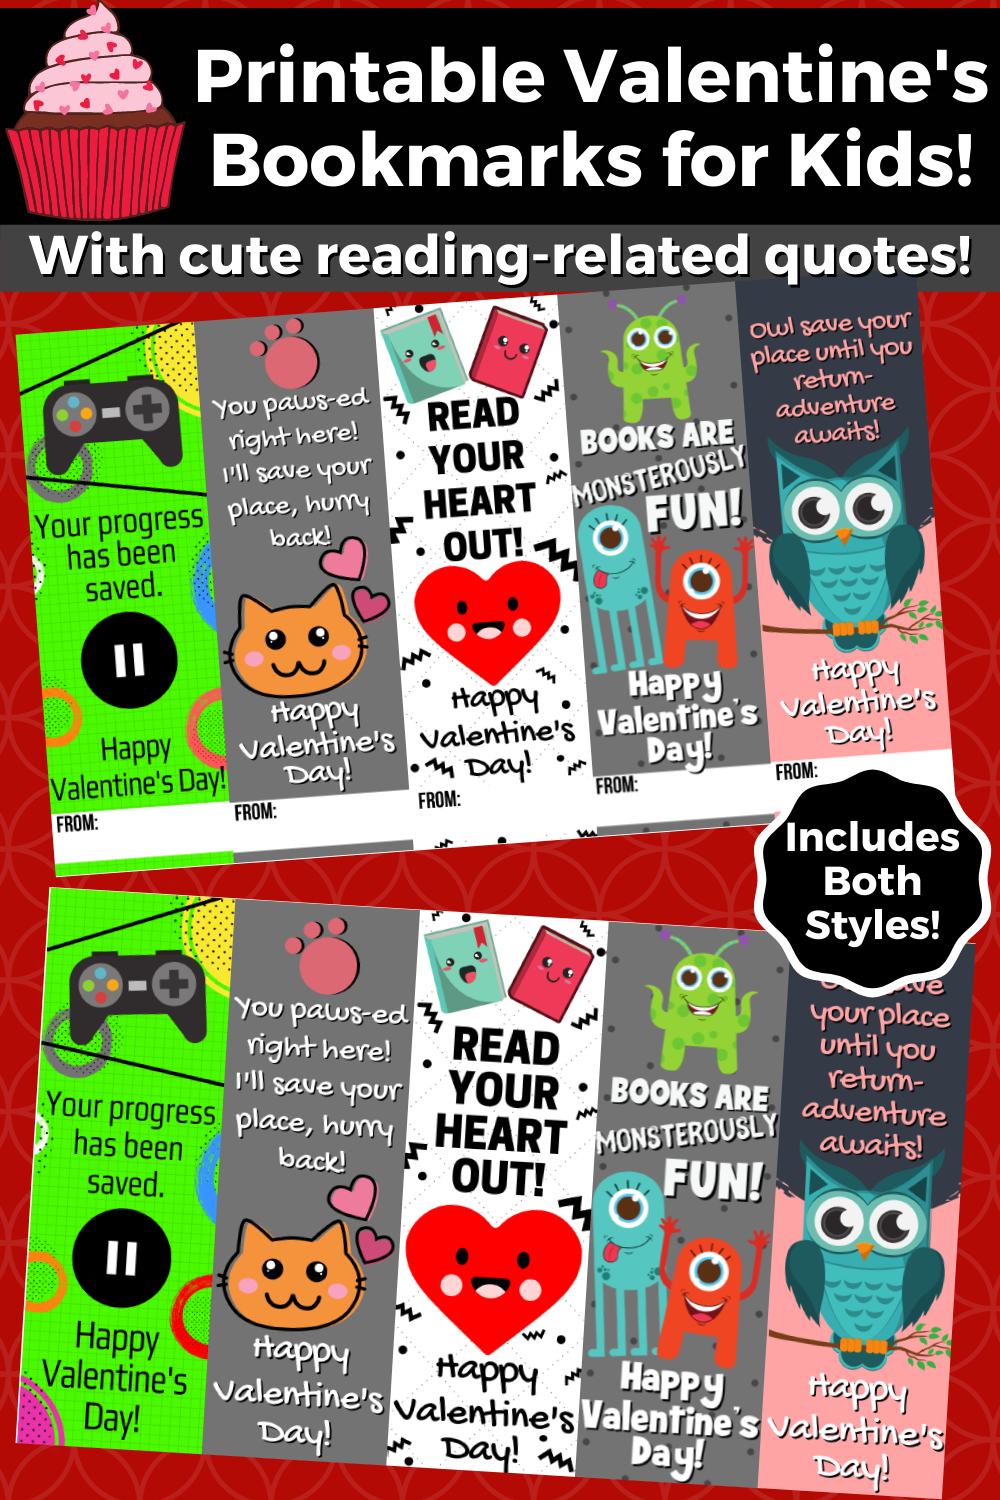 5 Printable Valentine's Bookmarks About Reading for Kids- 2 Styles Included!